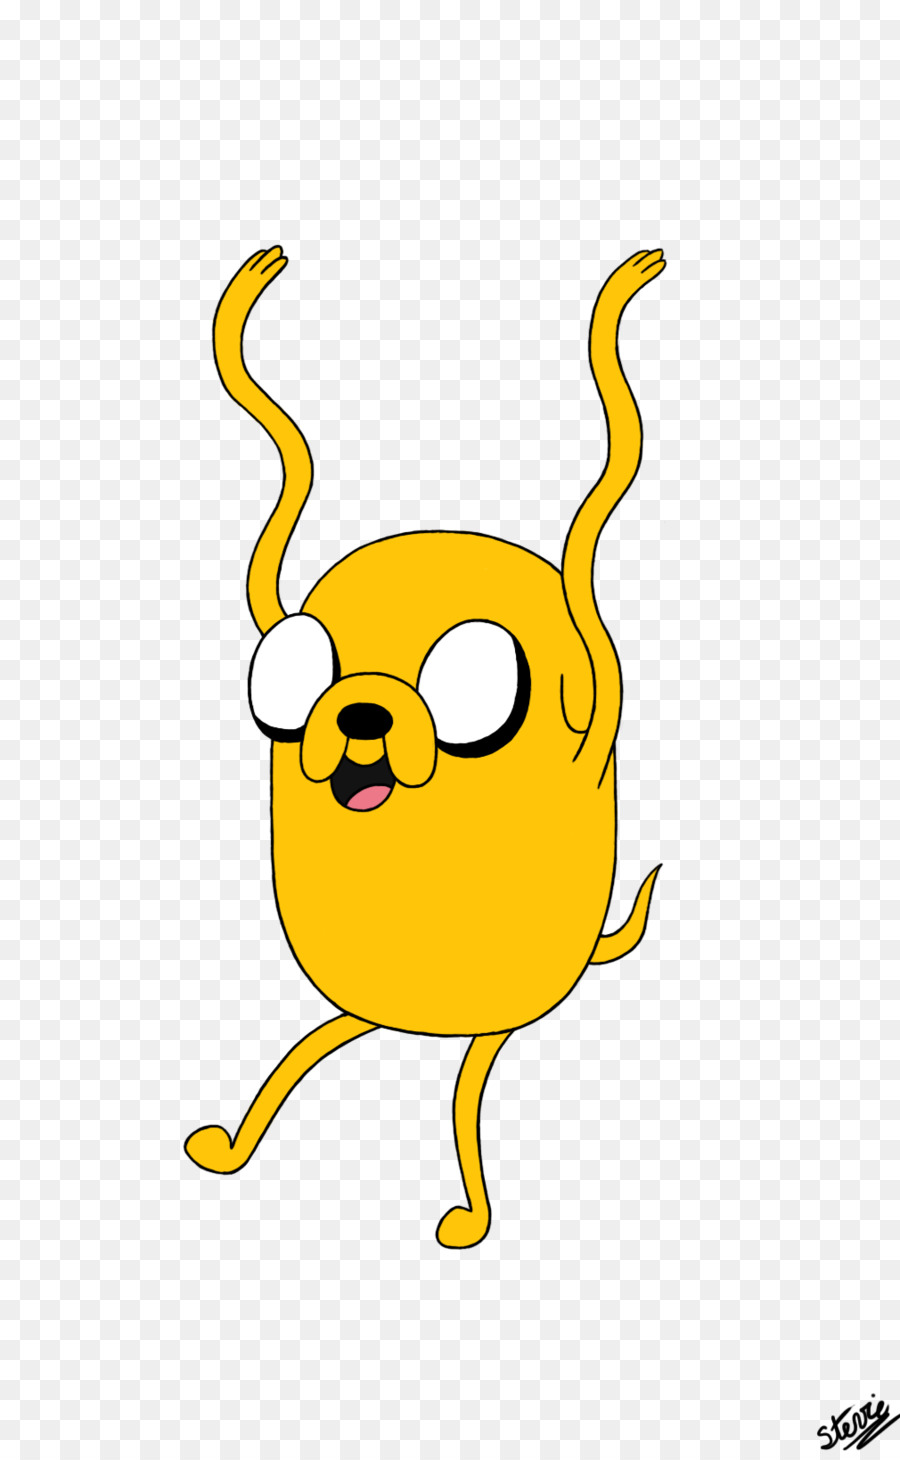 Jake the Dog Ice King Finn the Human Marceline the Vampire Queen Princess Bubblegum - adventure time png download - 900*1452 - Free Transparent Jake The Dog png Download.